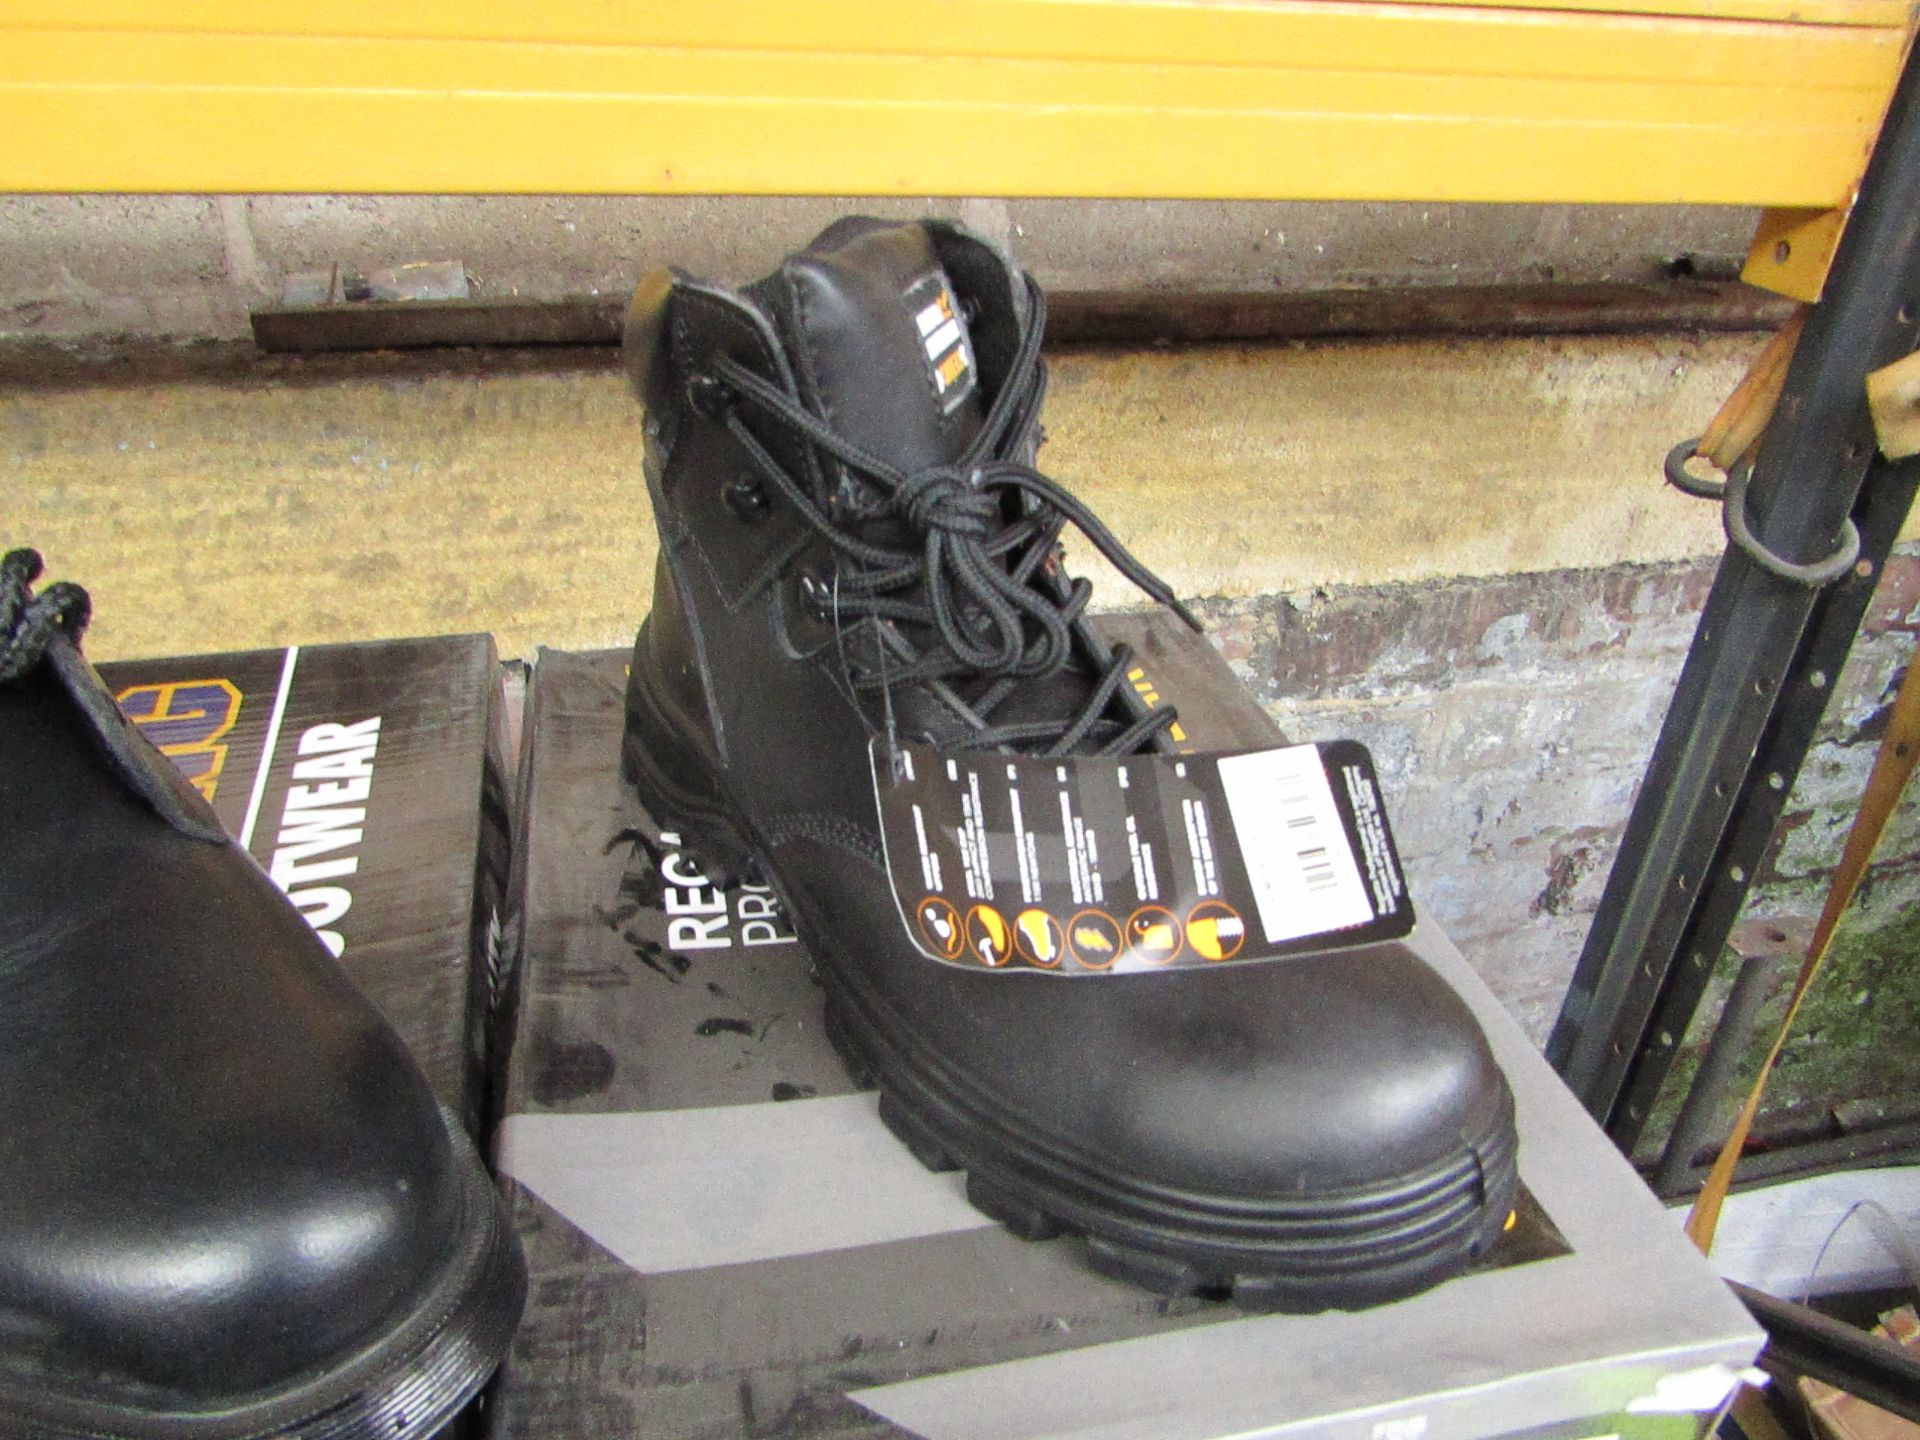 Regatta Crumpsall safety steel toe-cap boot, size 7, new and boxed.